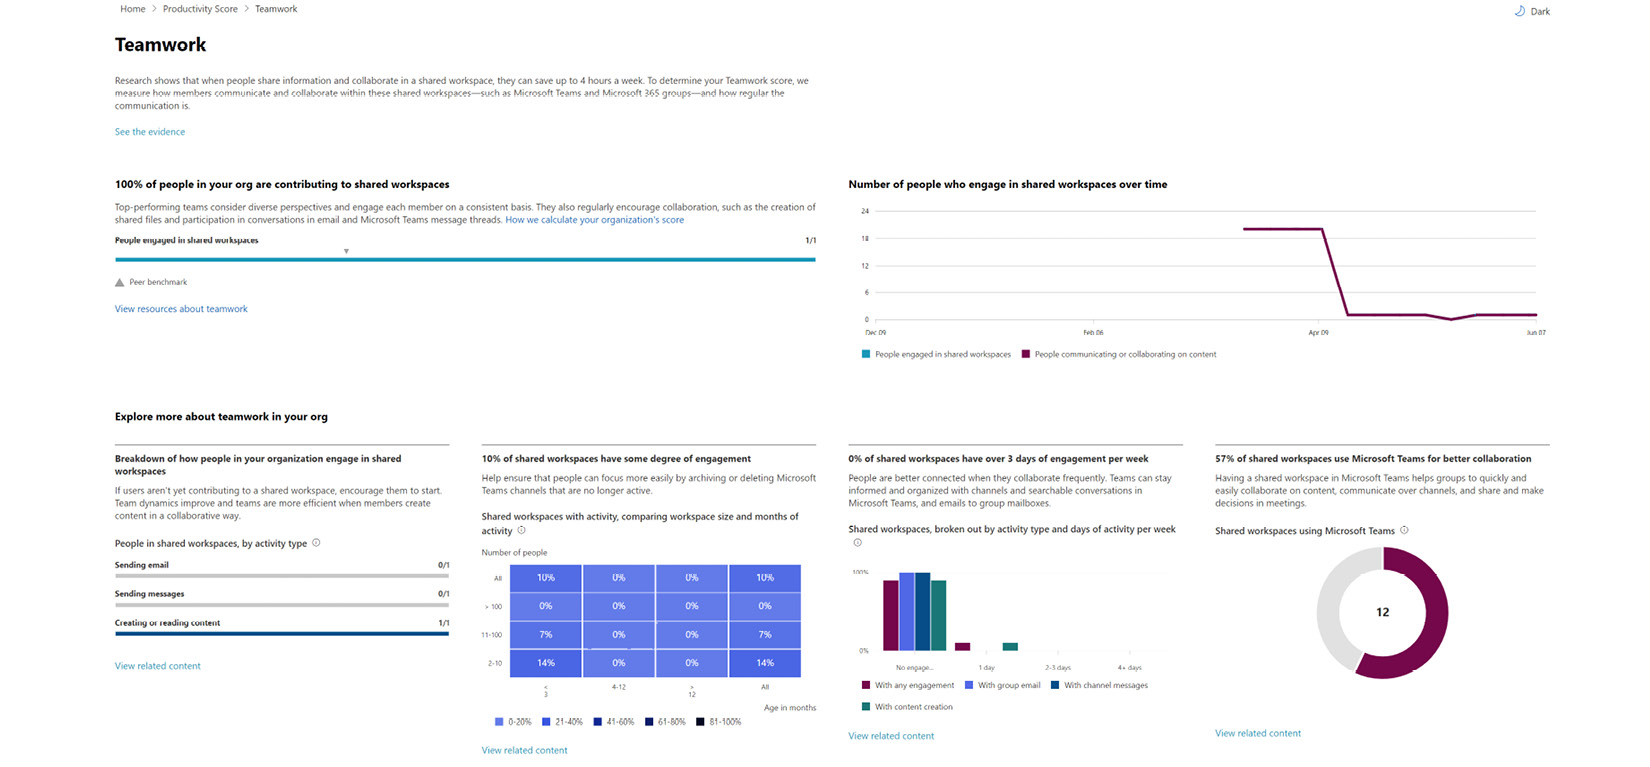 Figure 10.4 – Viewing the Teamwork experience details from the Productivity Score page
